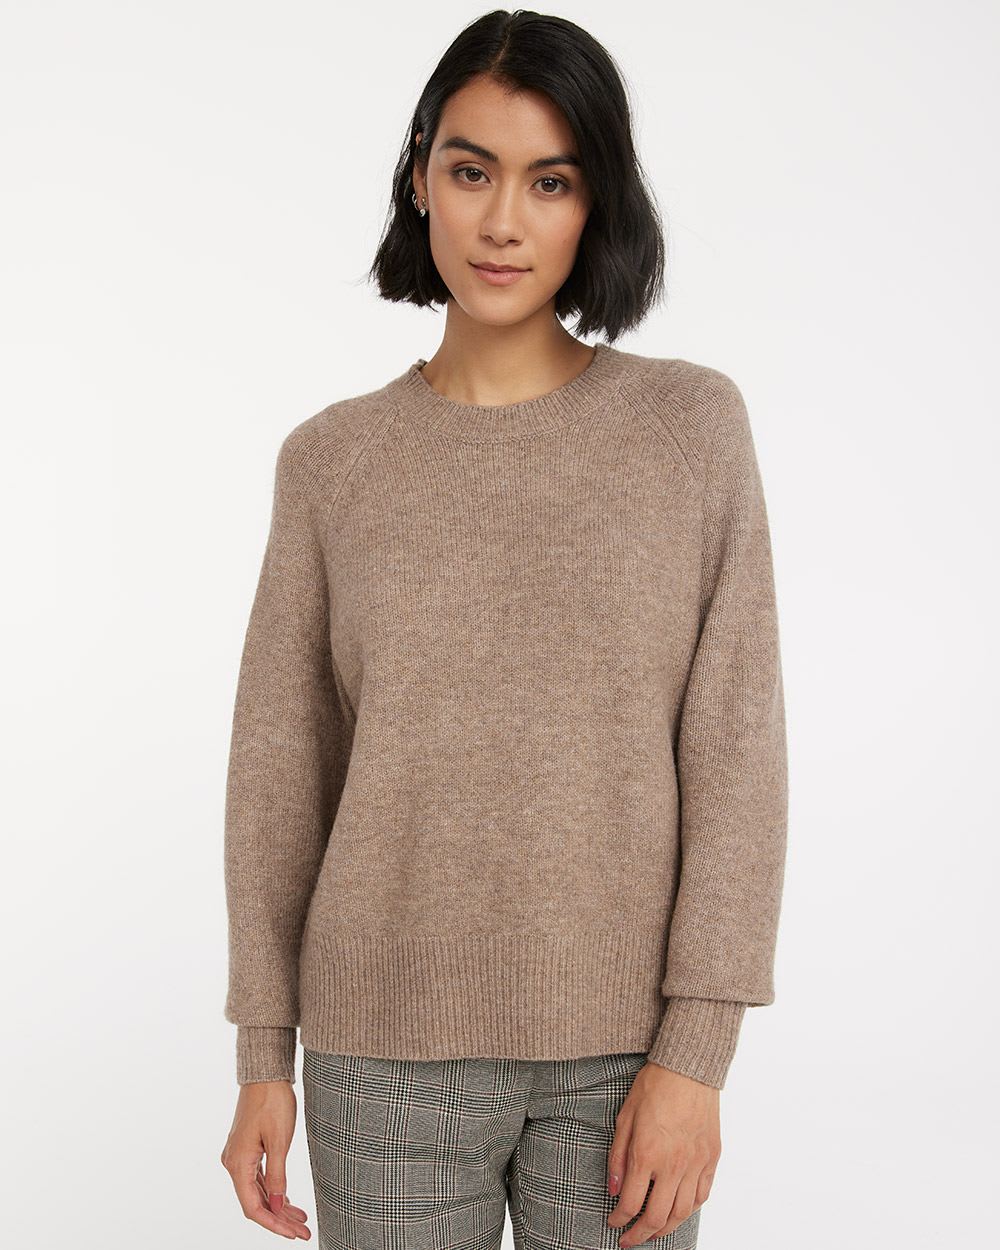 Hairy Knit Pullover with Balloon Sleeves